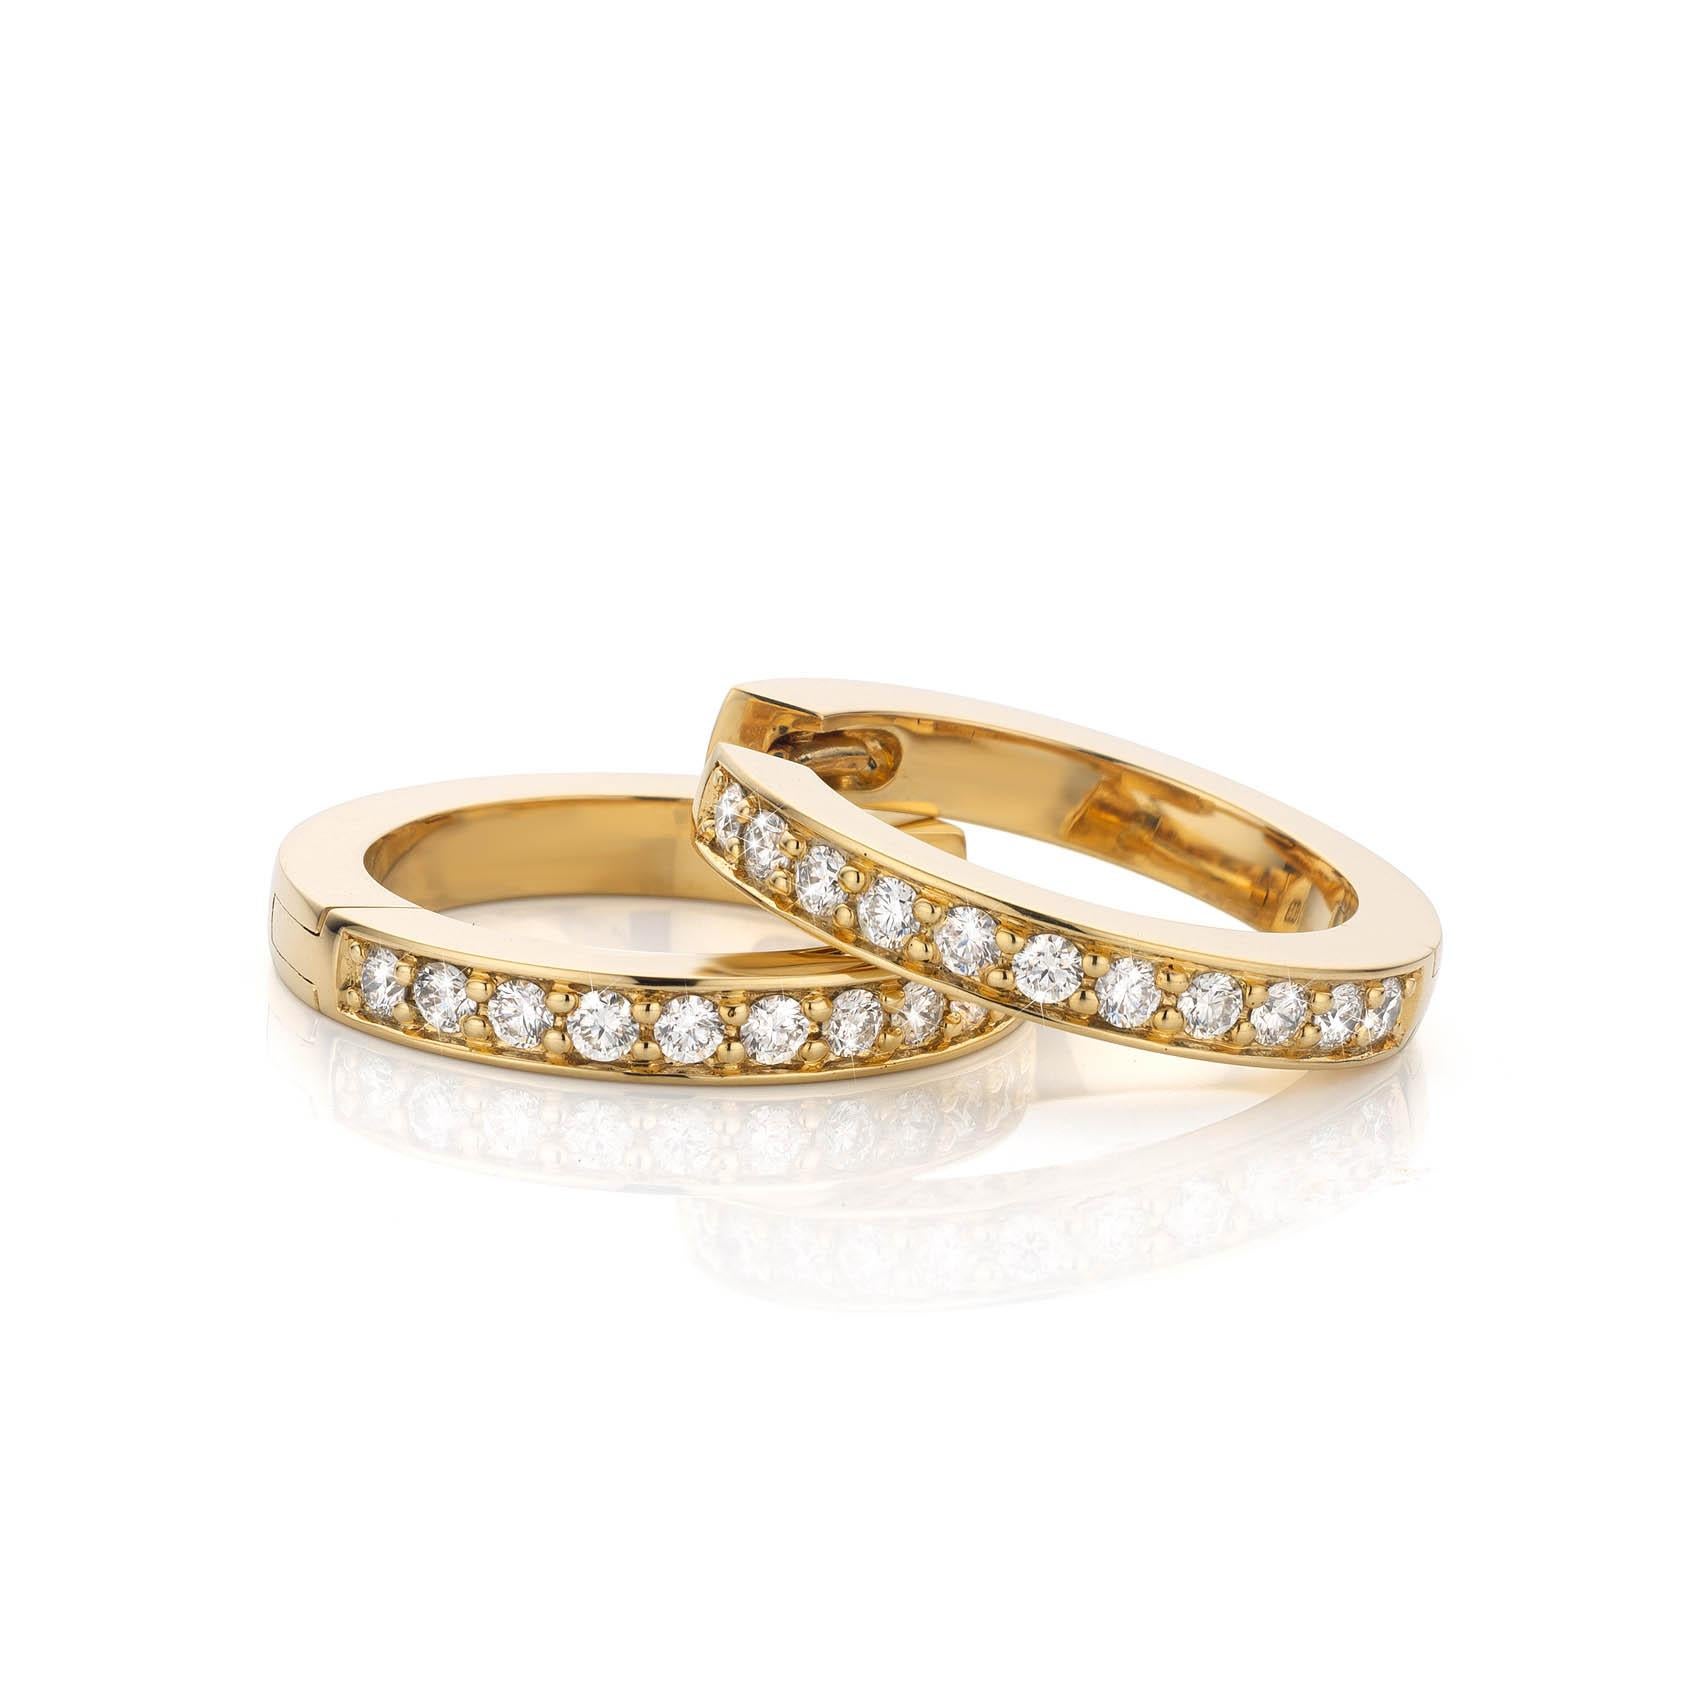 Contemporary Cober 11 x 0.025 ct. Brilliant-cut Diamonds Yellow Gold Hoop Earrings For Sale